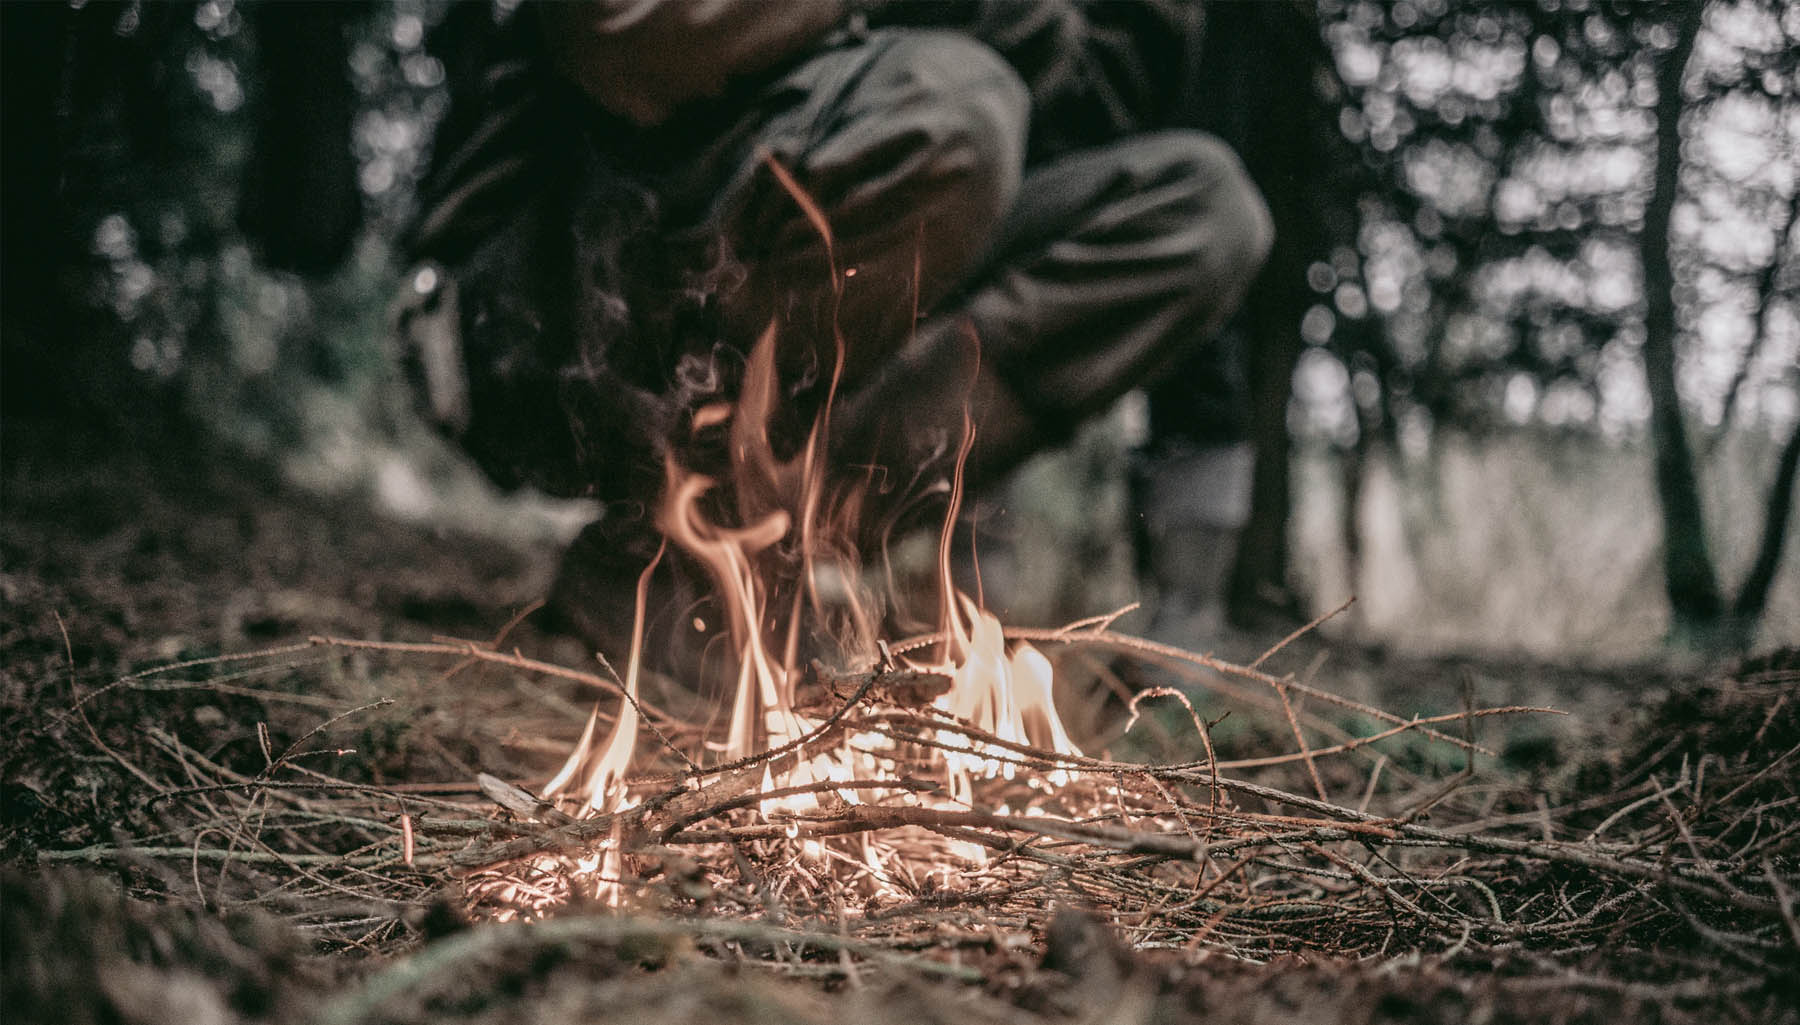 A photo of a person burning some twigs in the jungle